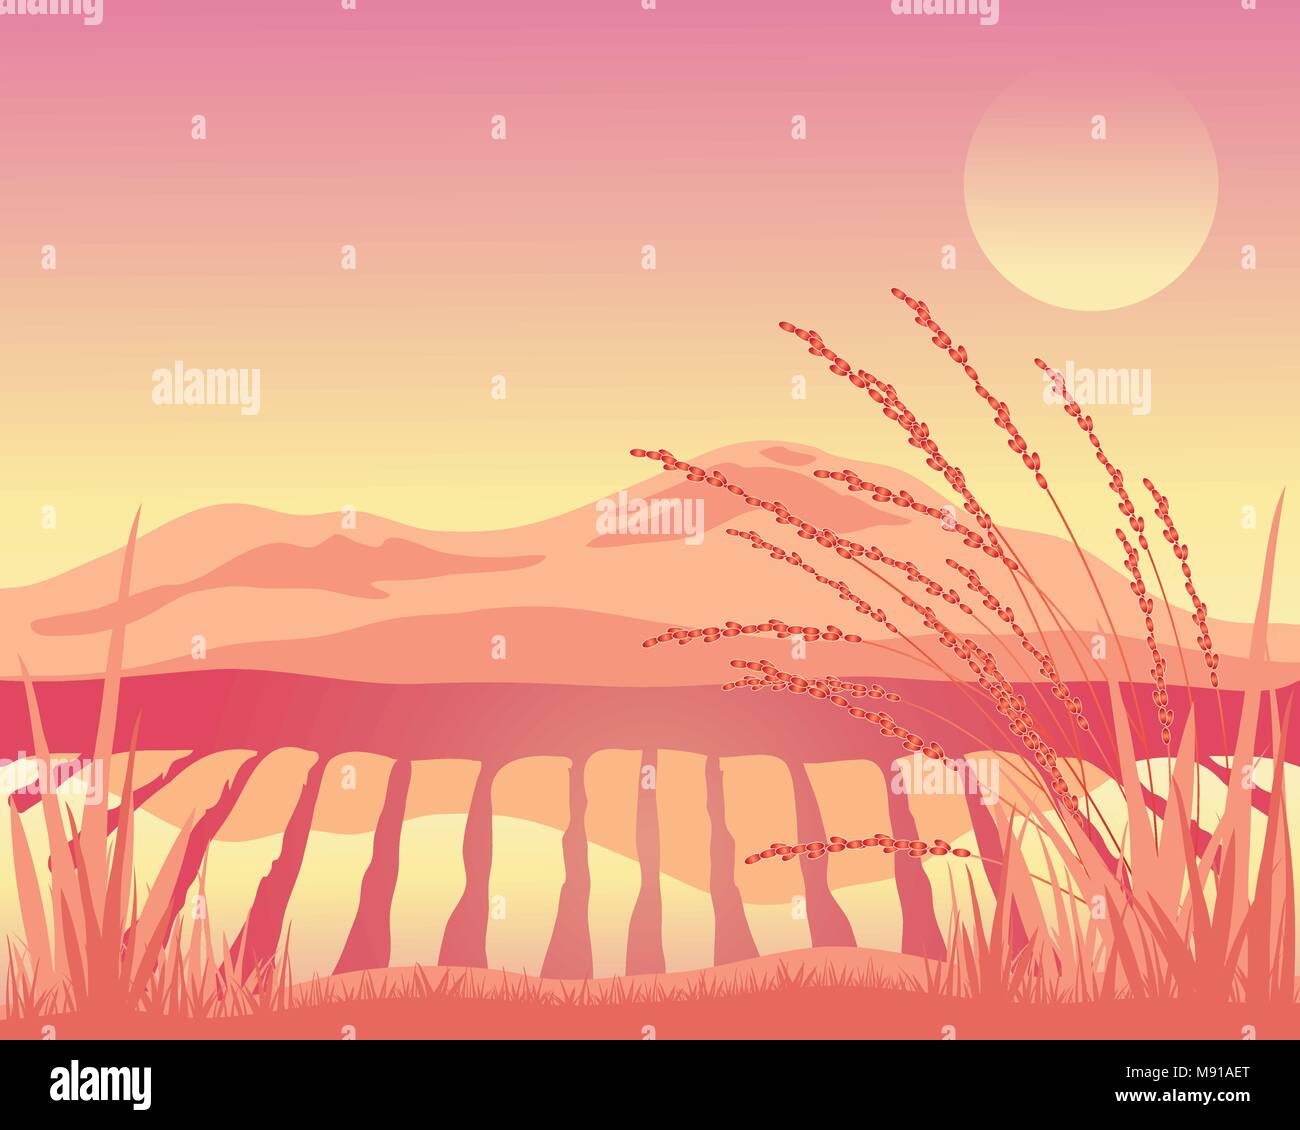 a vector illustration in eps 10 format of an Asian paddy field with mountain landscape at sunset in rose and pink colors Stock Vector